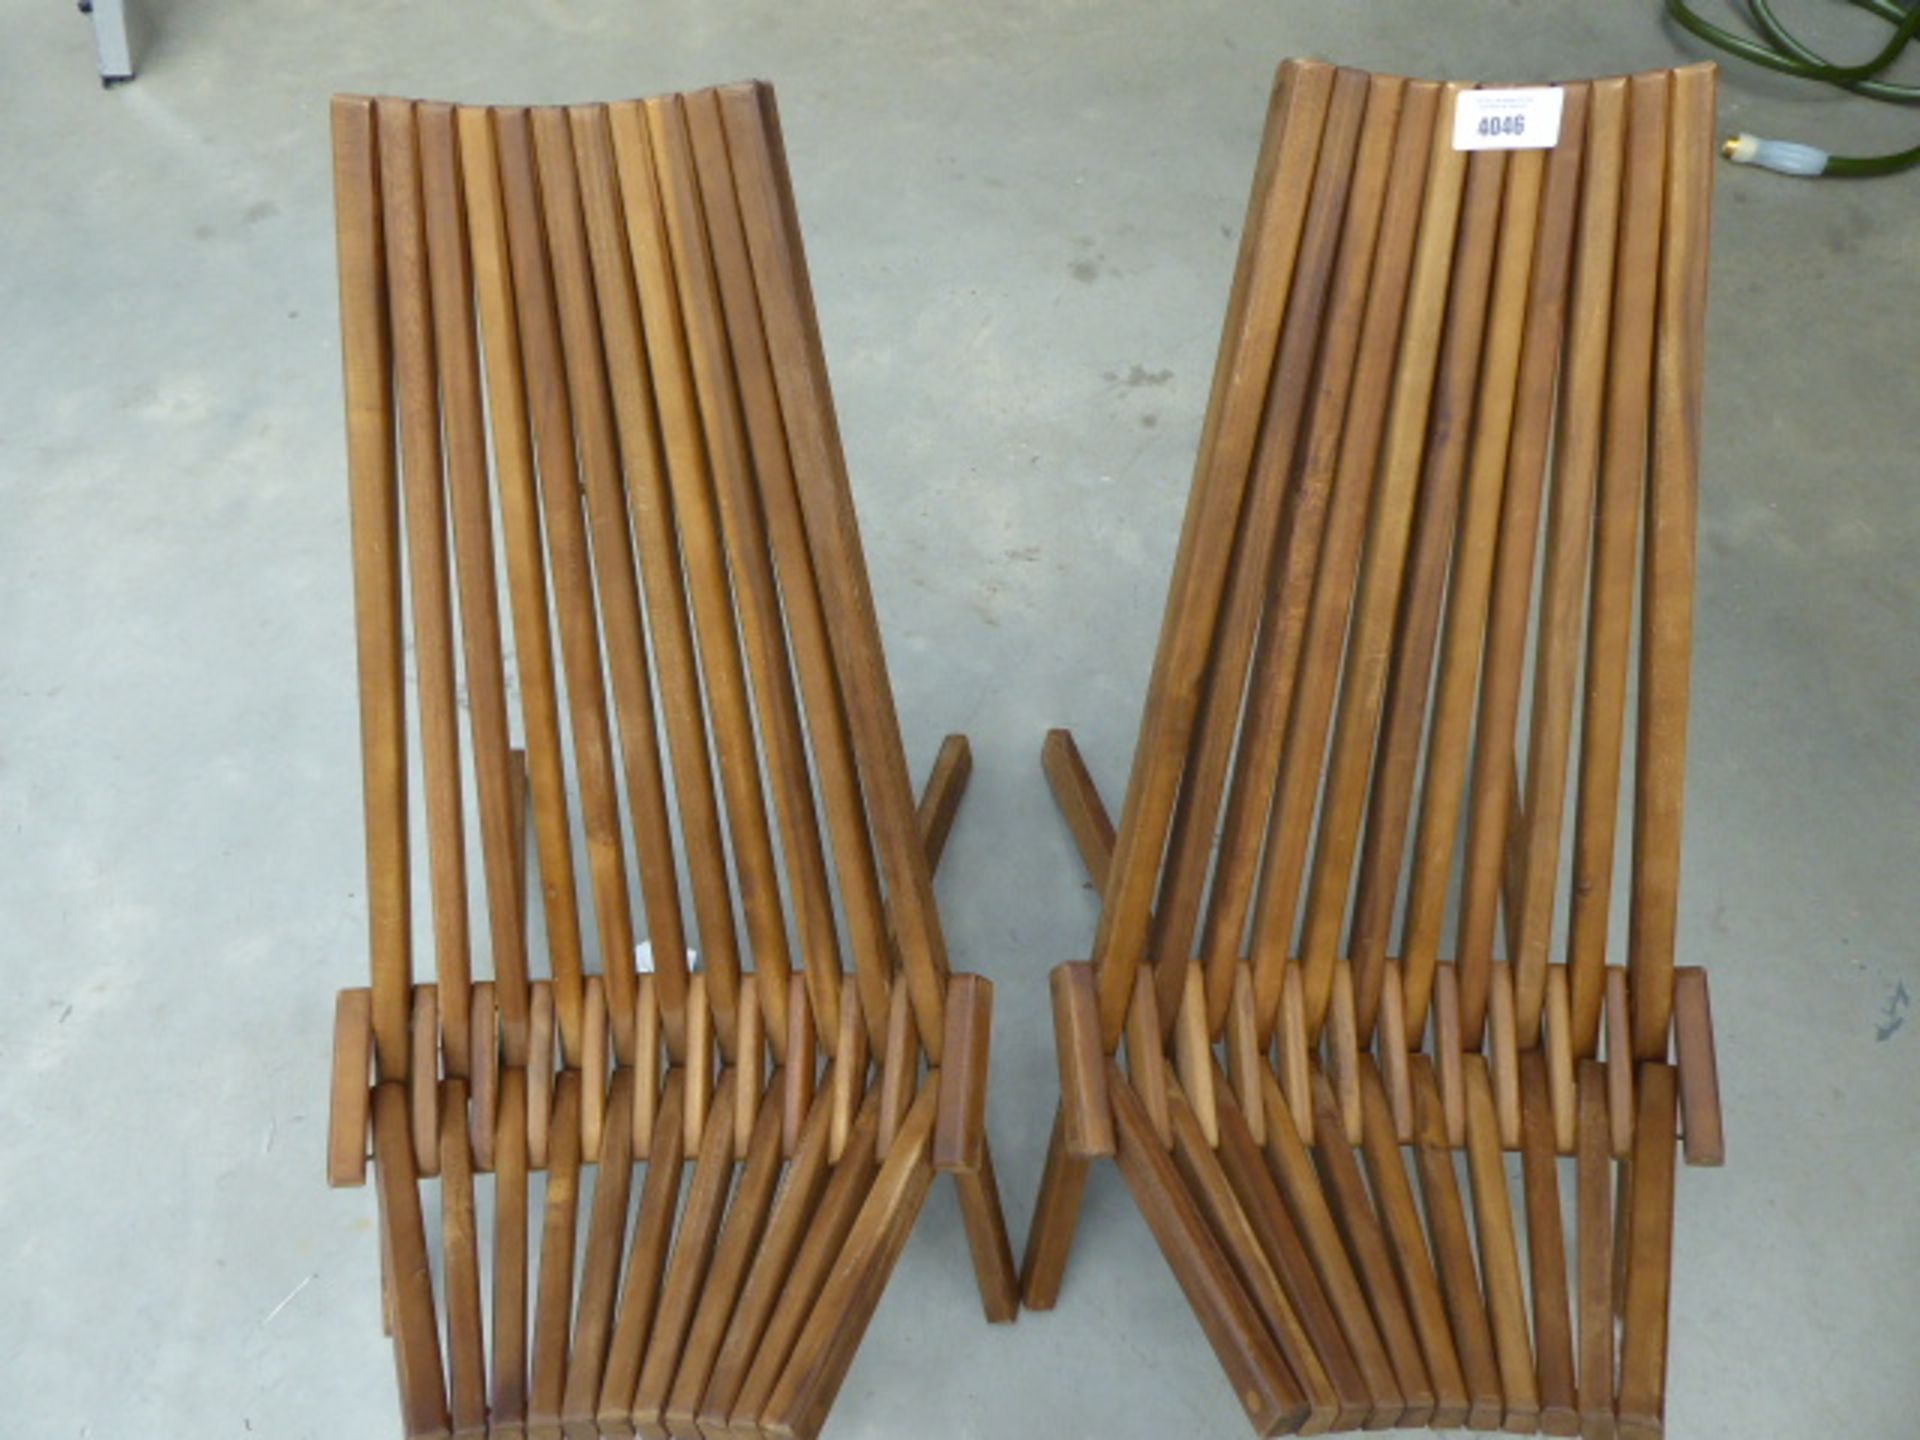 2 Clevermade wooden garden chairs